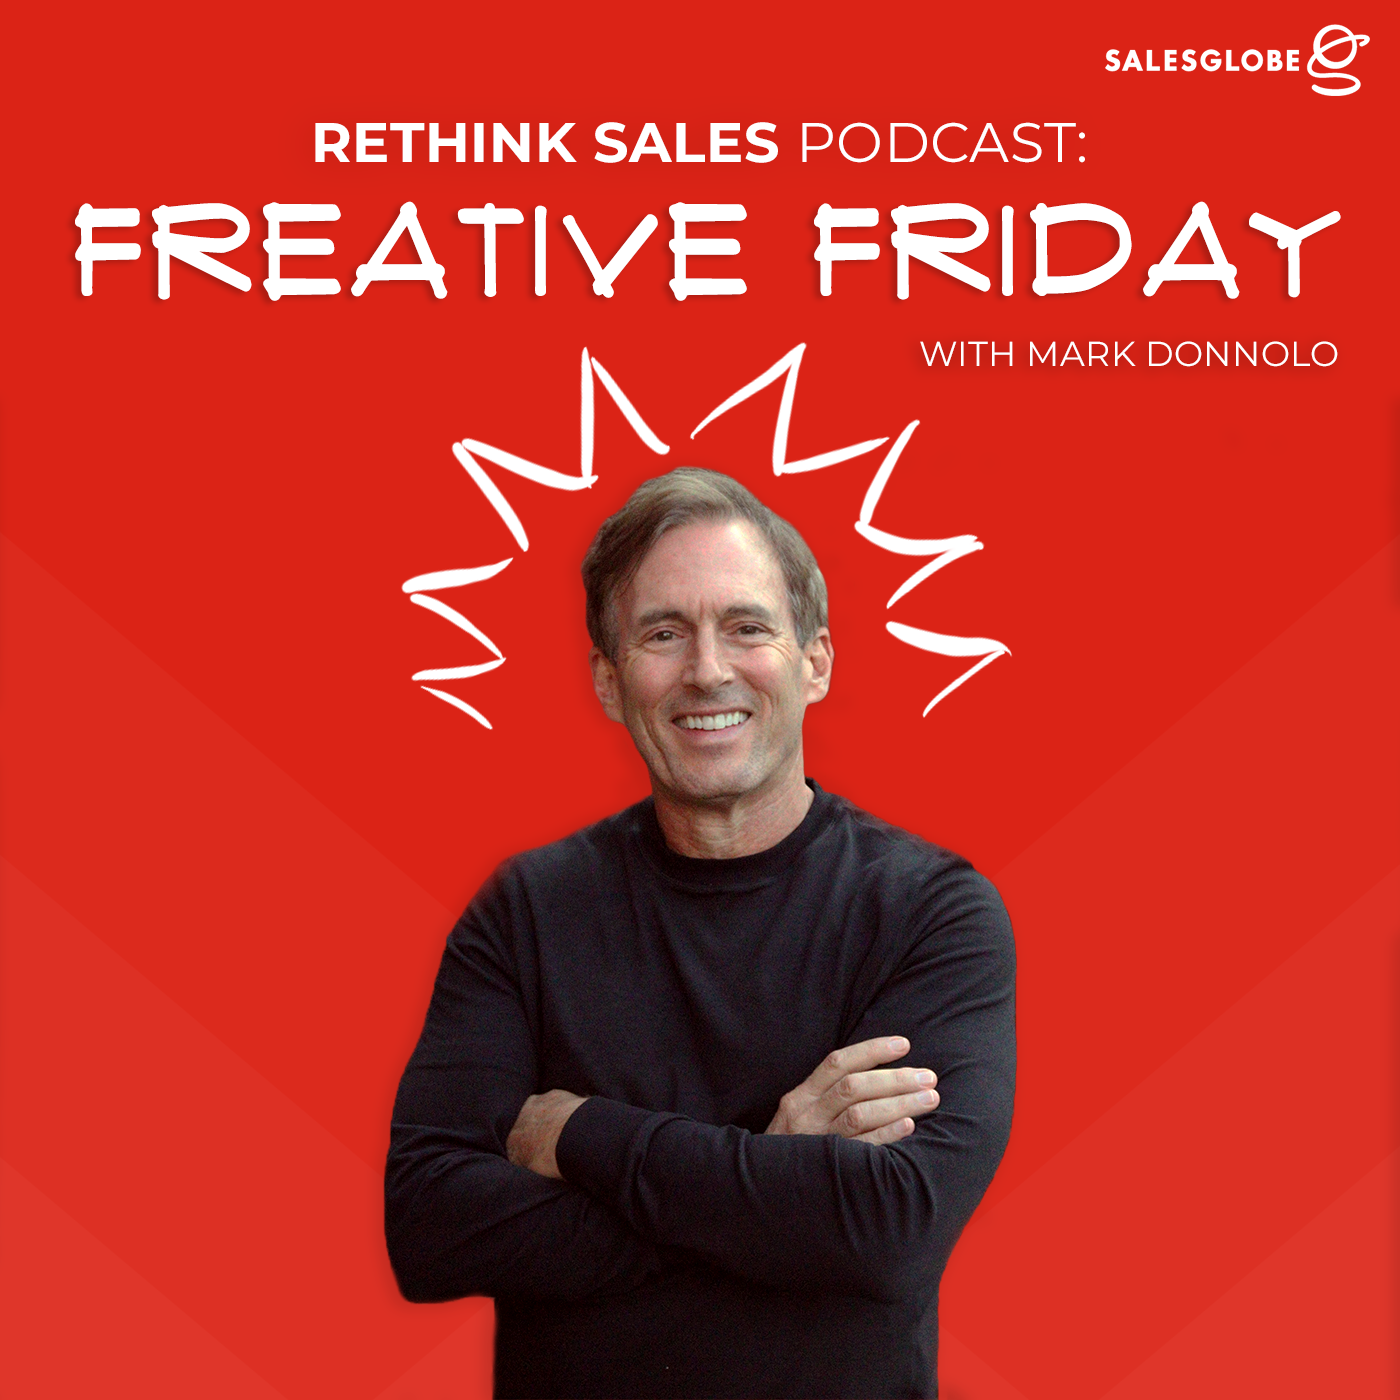 95: Freative Friday - Insight in Your Hunt for The Revenue Roadmap Pt 1